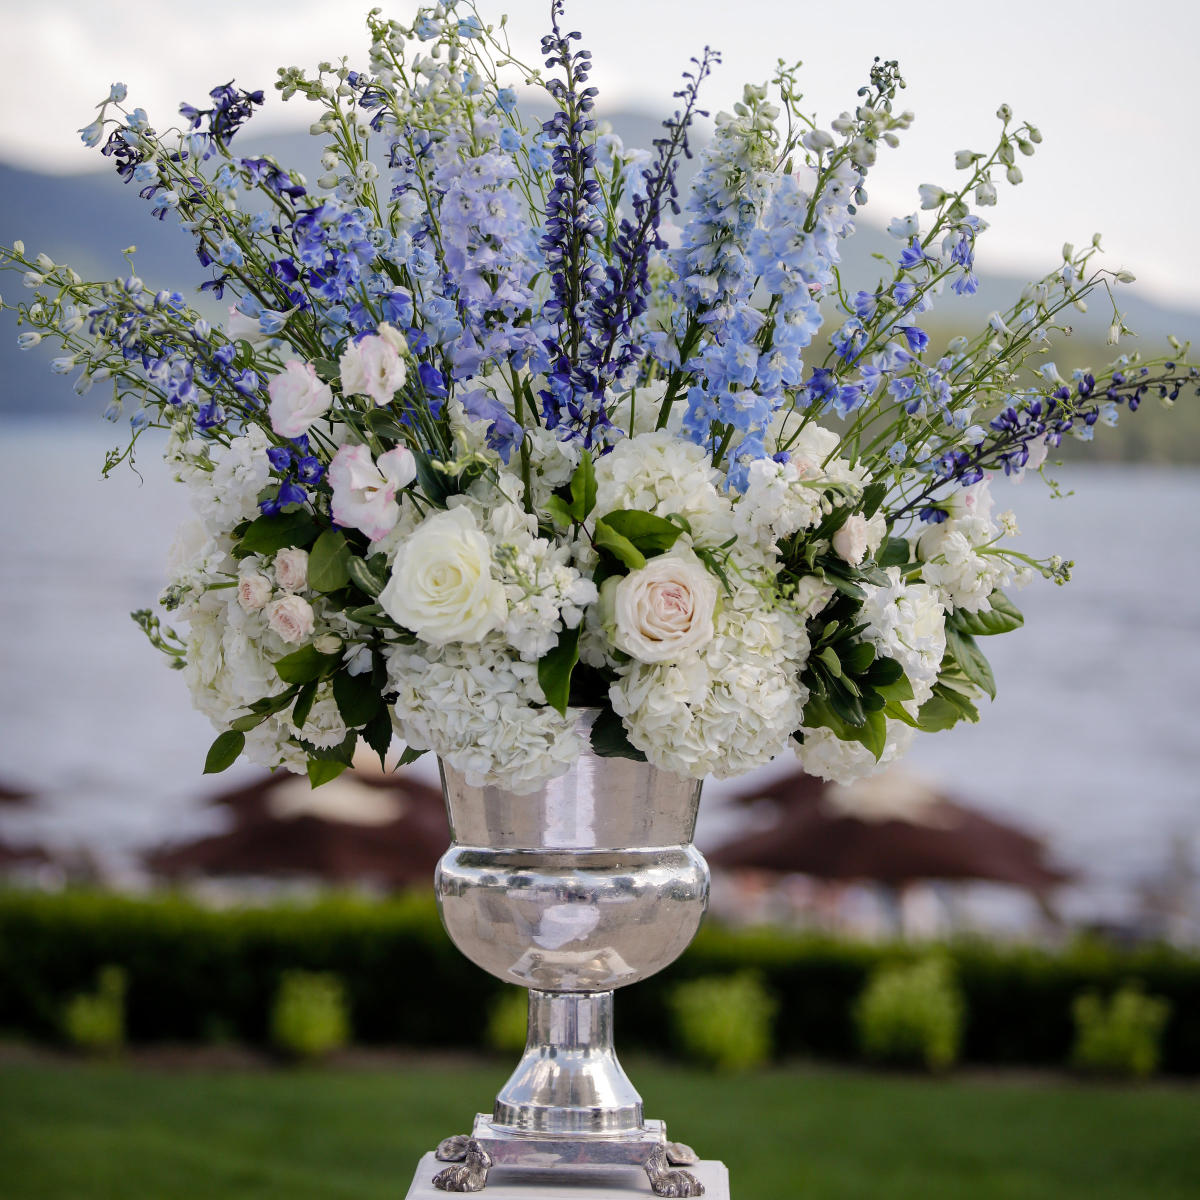 A silver plated floral vesel with stunning wedding flowers, on a white wood pedestal, and a lake view on the background